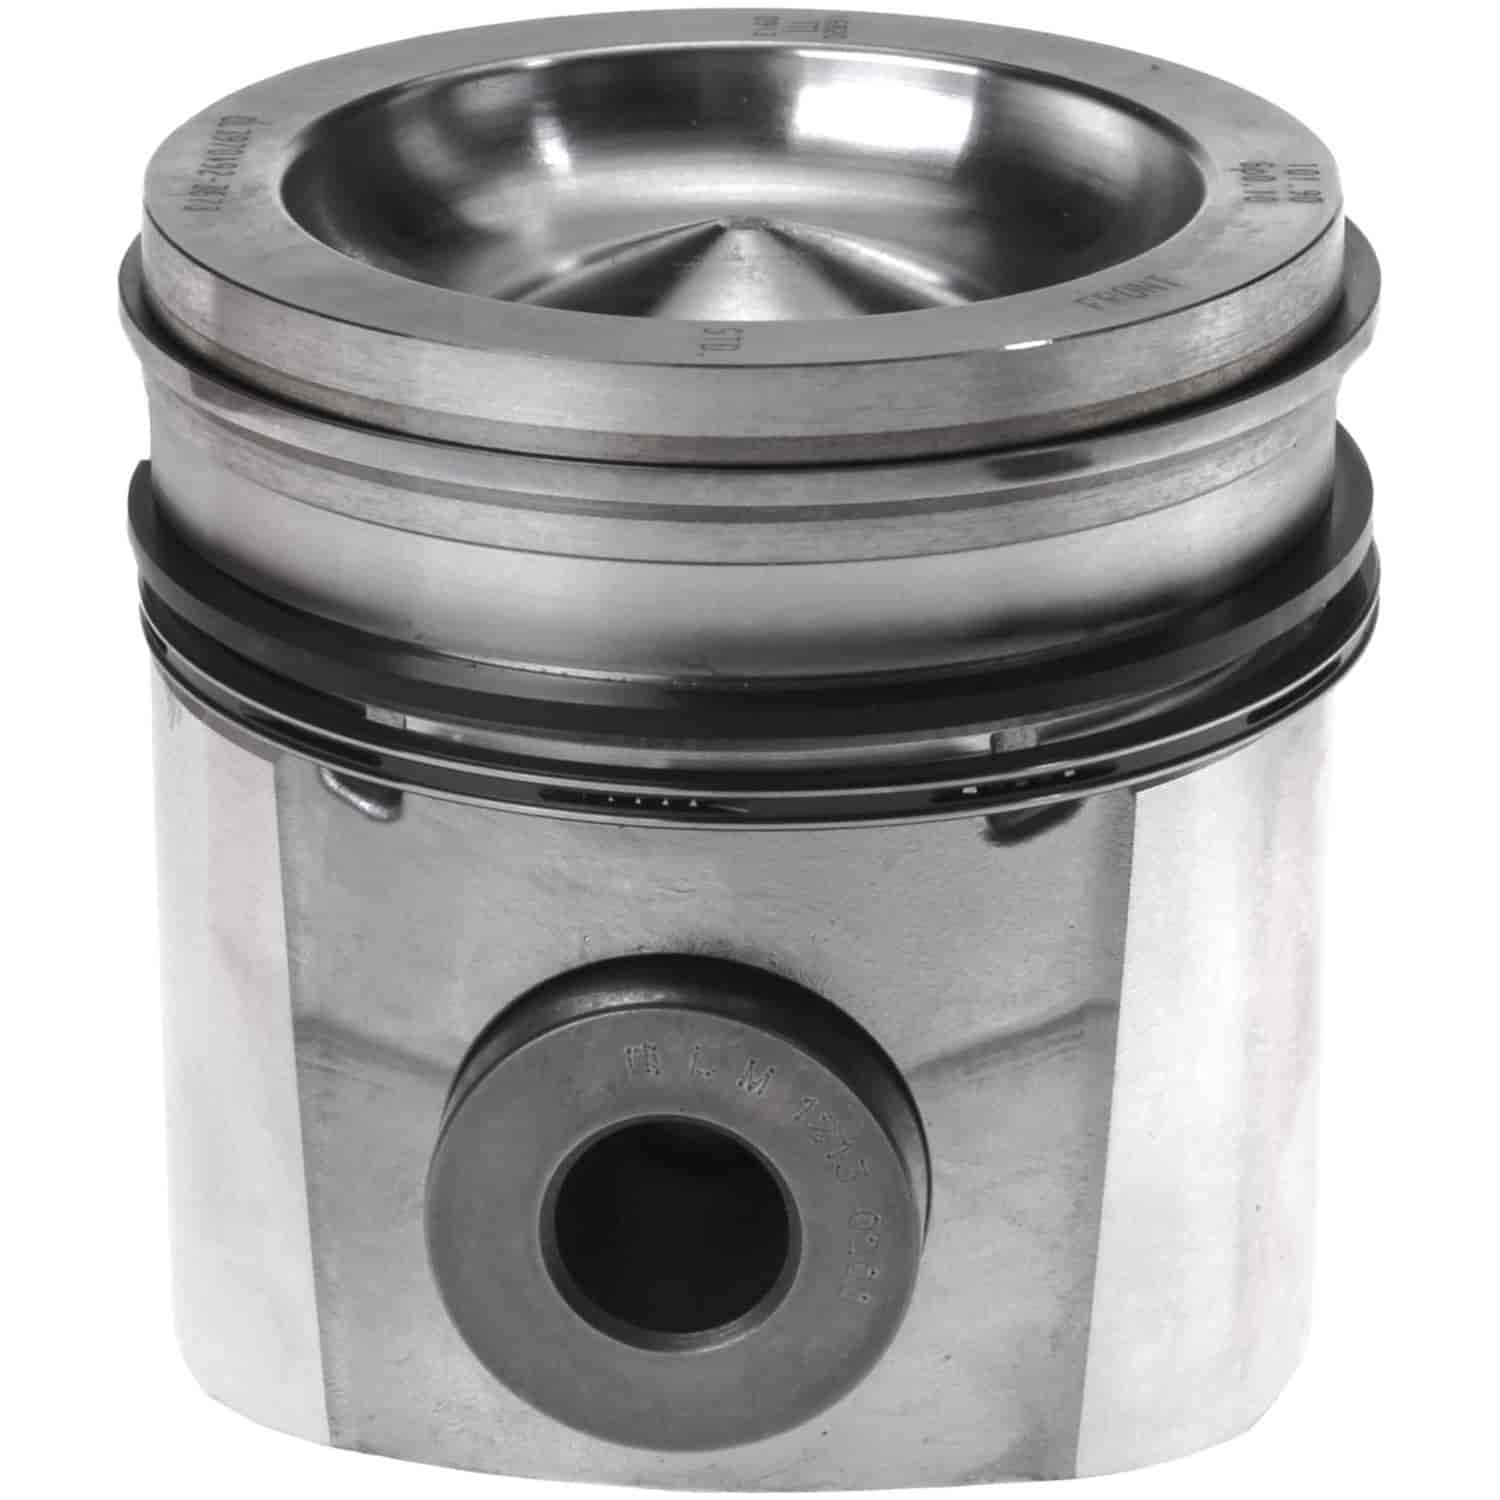 Piston and Rings Set 2005-2007 Dodge, Fits Cummins Diesel L6 5.9L with 4.016" Bore (Standard)